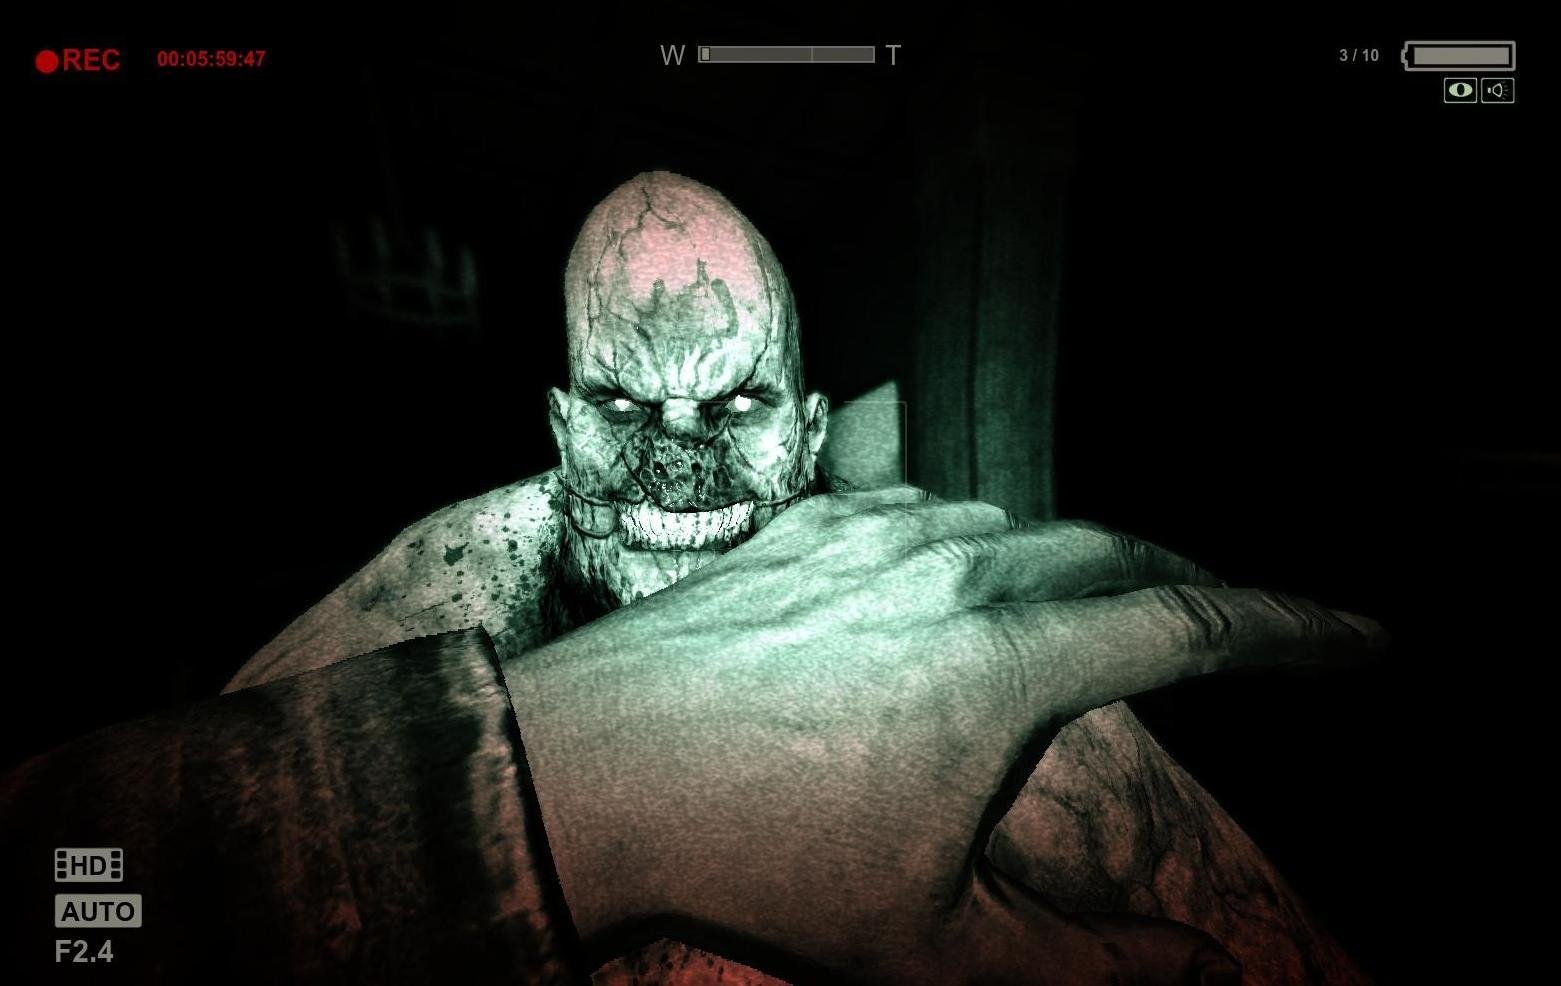 New Documentary Looks at Red Barrels' Development of 'The Outlast